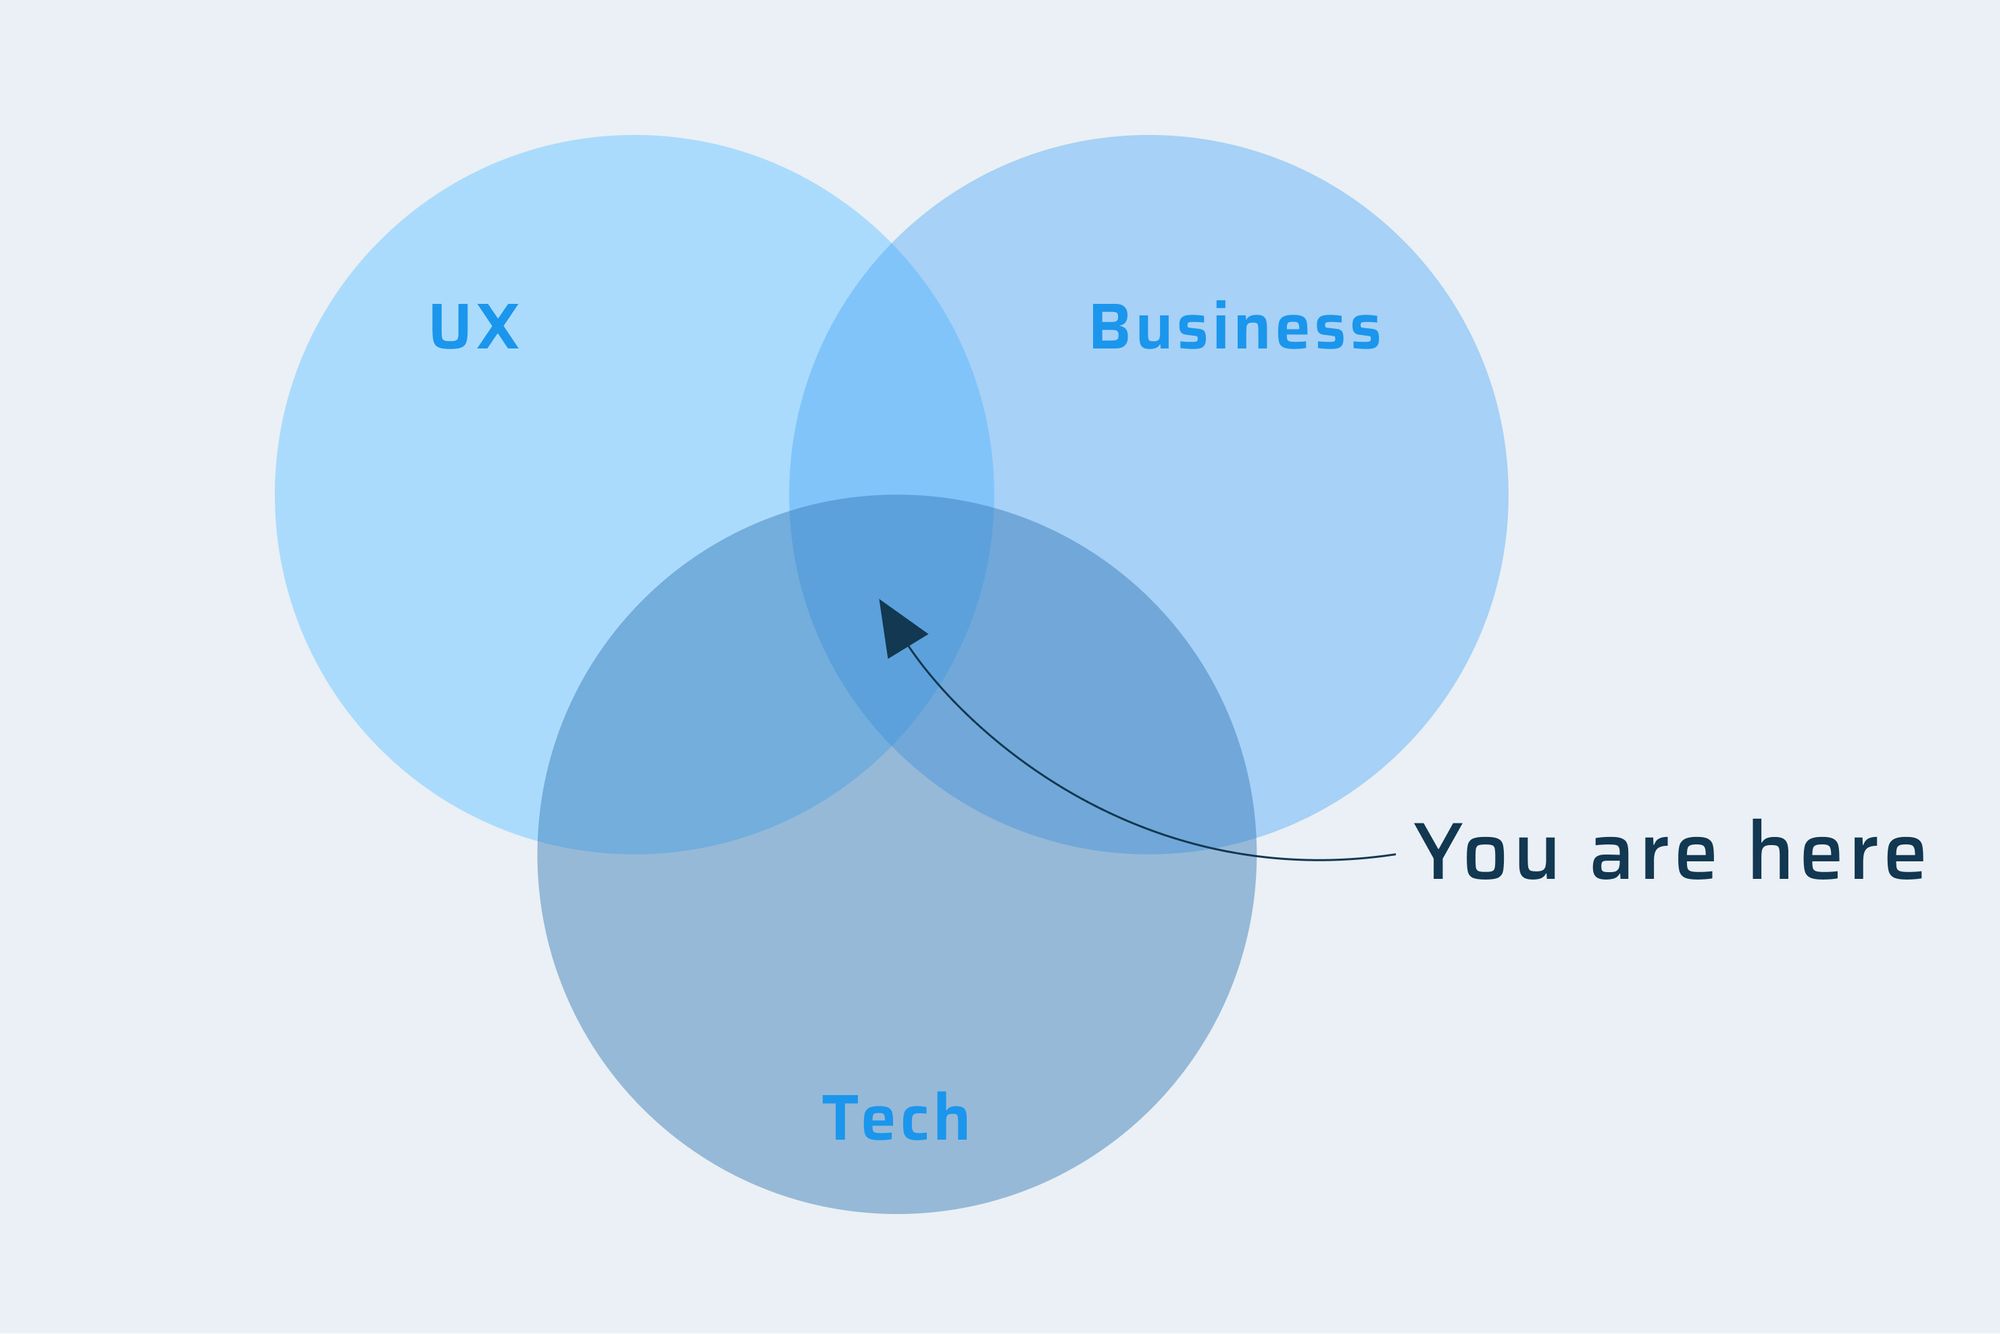 Product management is the intersection between business, technology, and UX. 